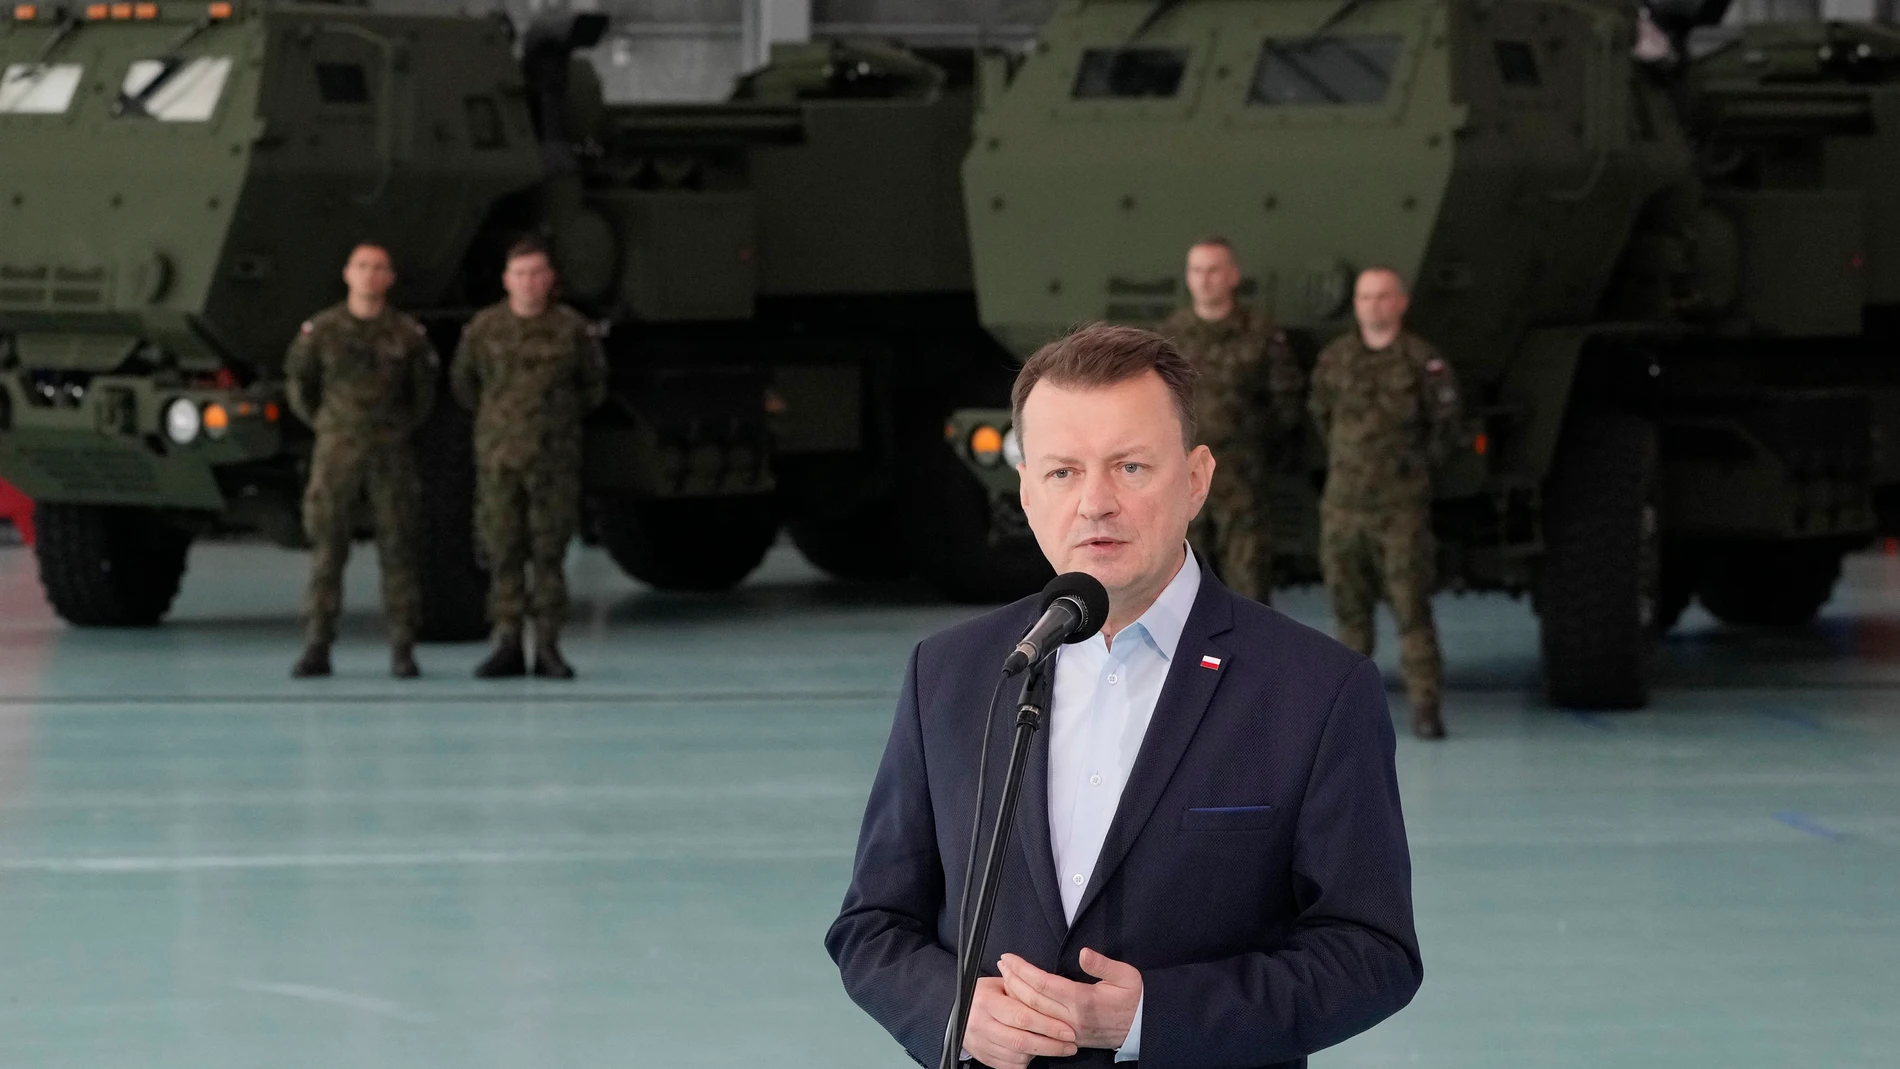 Poland's Defense Minister Mariusz Blaszczak speaks during ceremony after receiving its first shipment of U.S.-made HIMARS rocket launchers, at an air base in Warsaw, Poland, on Monday, 15 May 2023. Poland has received its first shipment of U.S.-made HIMARS rocket launchers, part of an upgrade of its defenses amid security concerns due to the war in neighboring Ukraine. (AP Photo/Czarek Sokolowski)